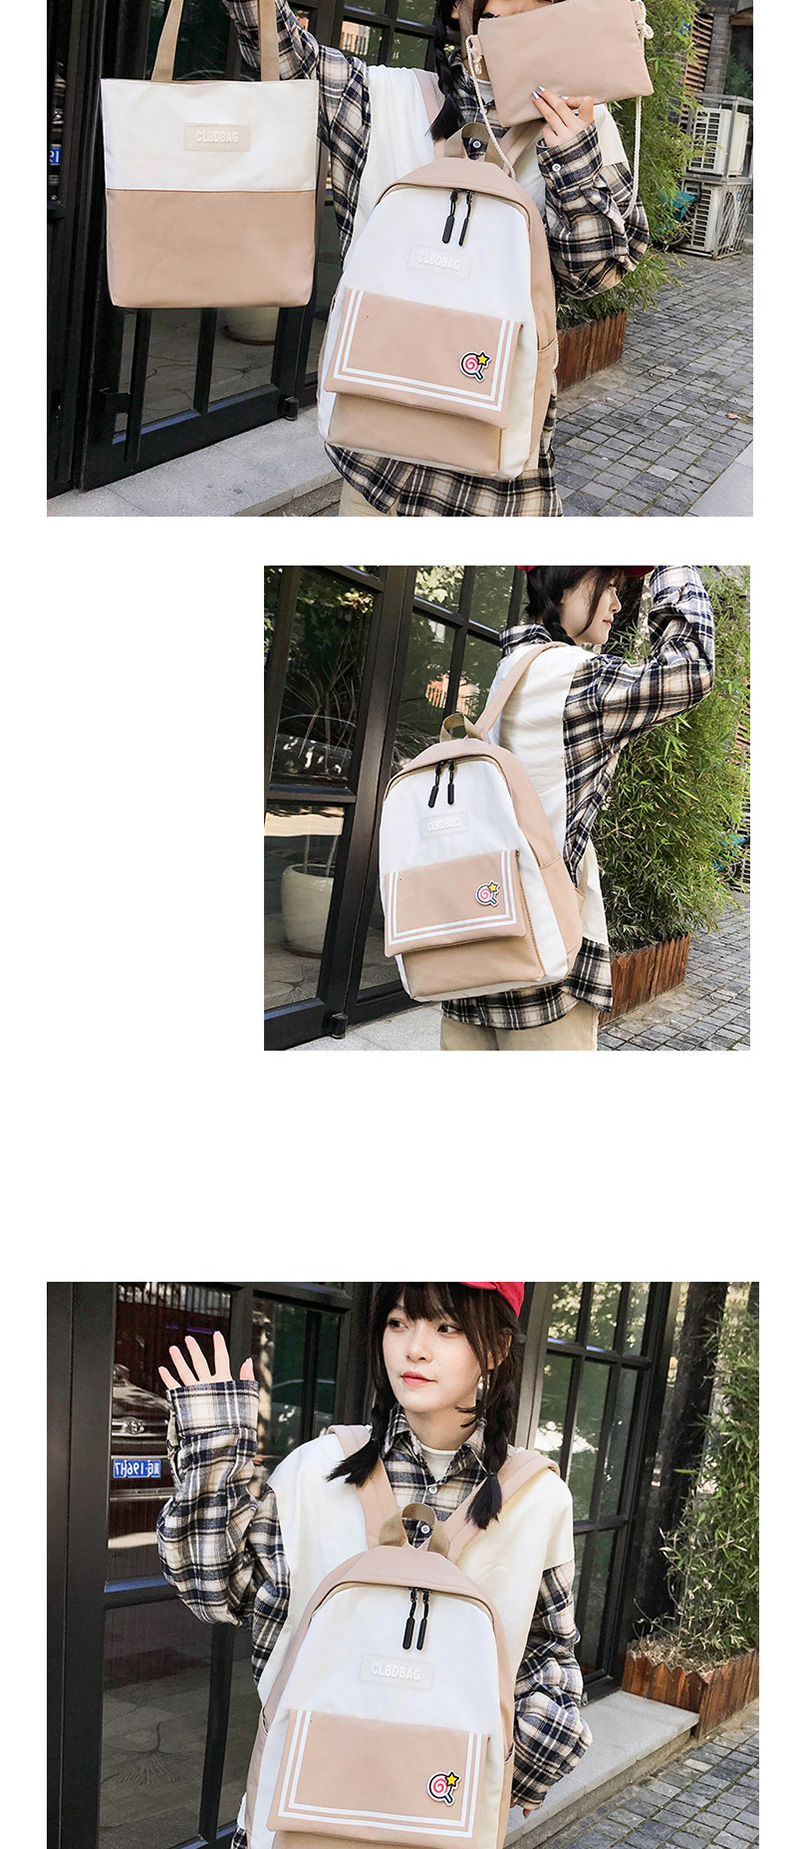 Fashion Pink Contrast Stitching Striped Backpack,Backpack